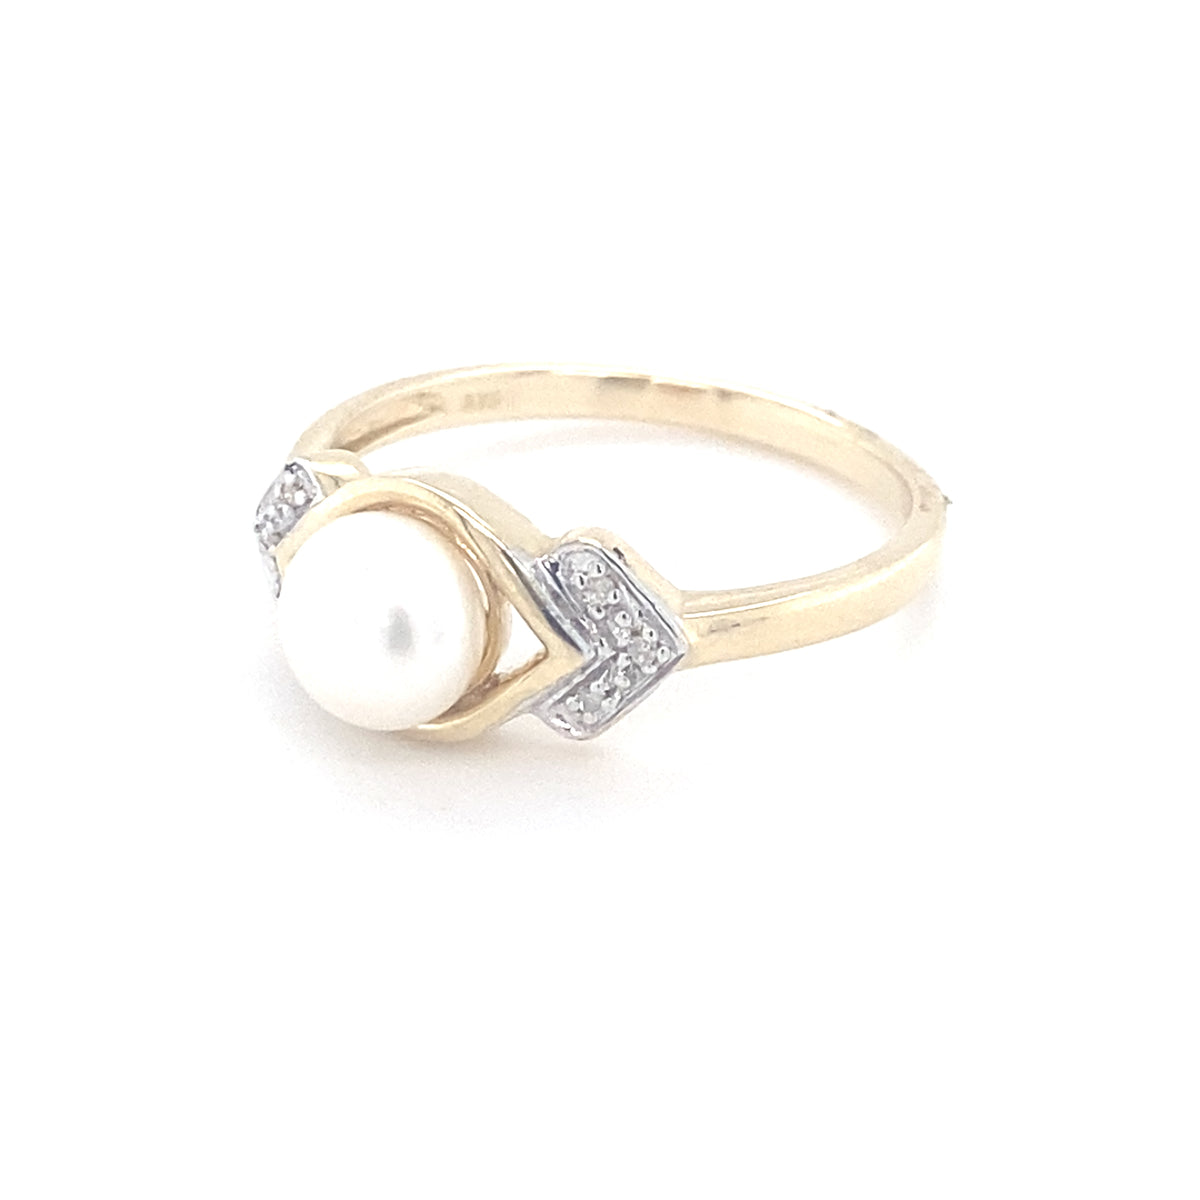 9kt Gold Pearl Ring with Diamonds